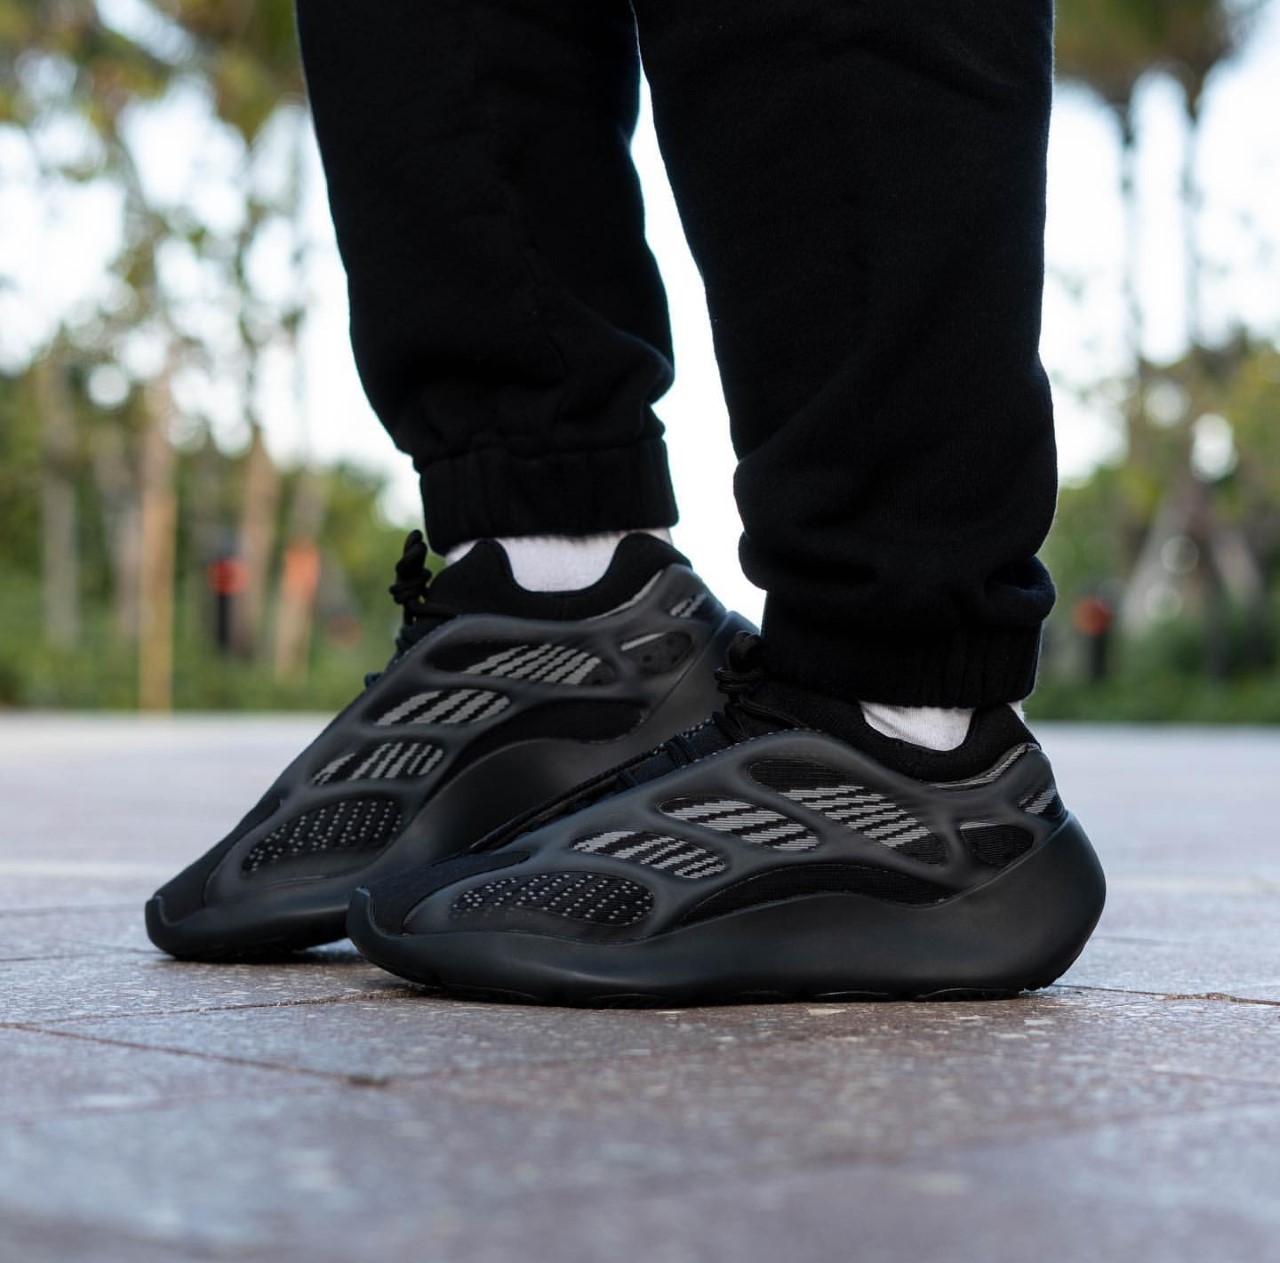 On-Foot Look At The Adidas Yeezy 700 V3 “Alvah”